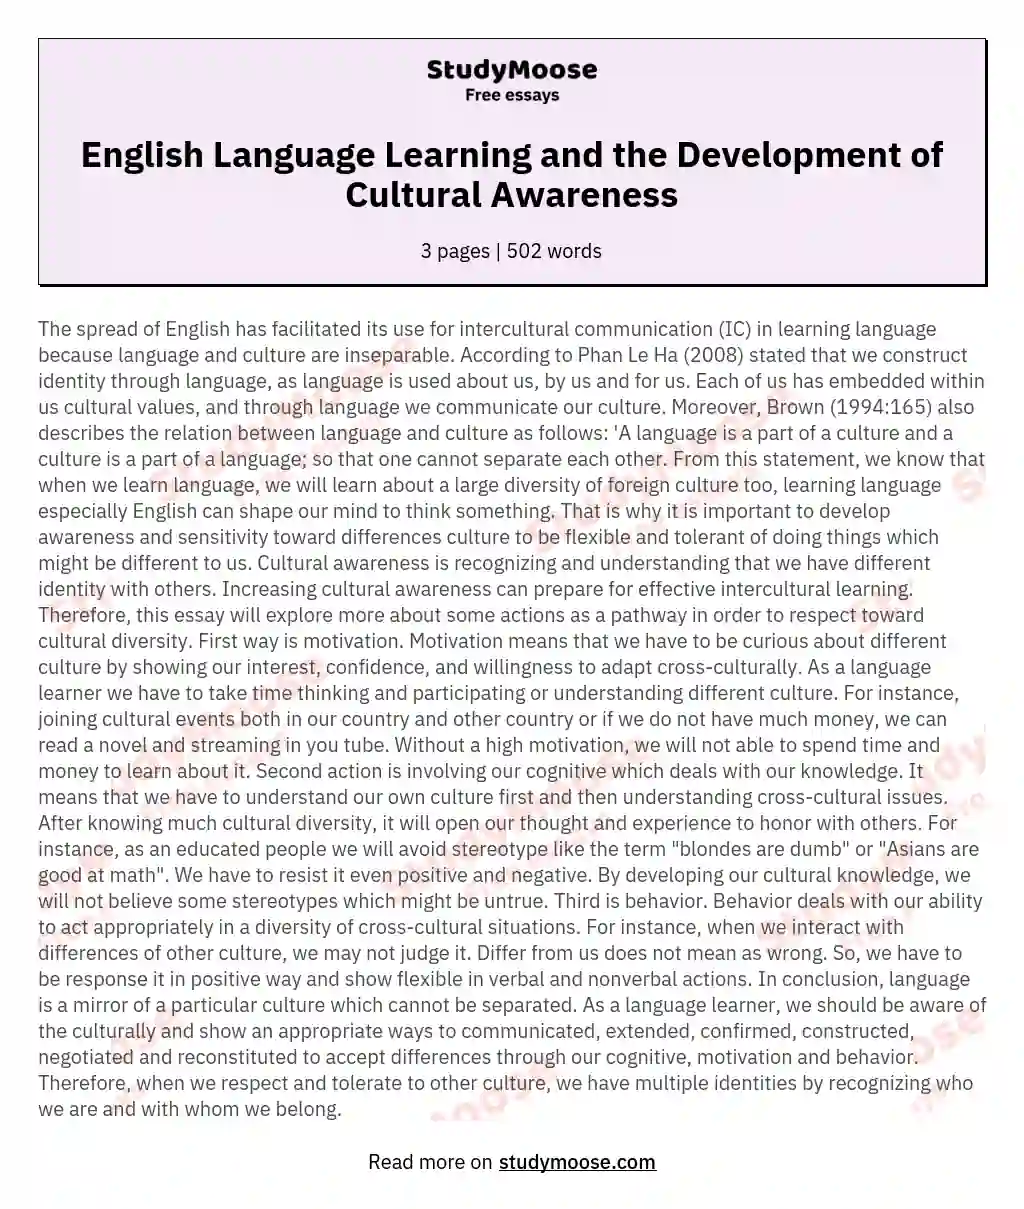 English Language Learning and the Development of Cultural Awareness essay